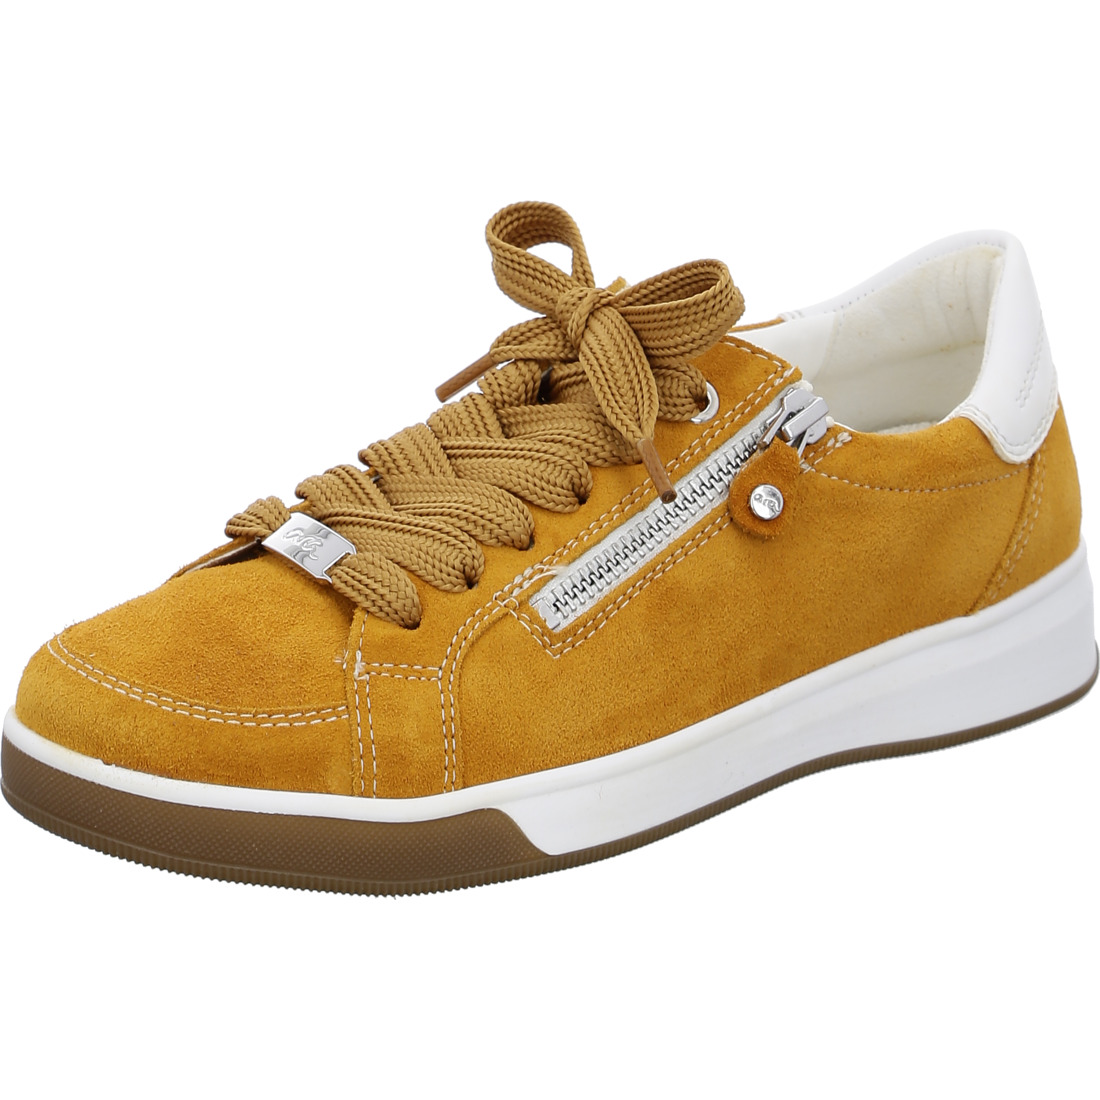 Sneakers*Ara Shoes Sneakers Baskets Rom ocre